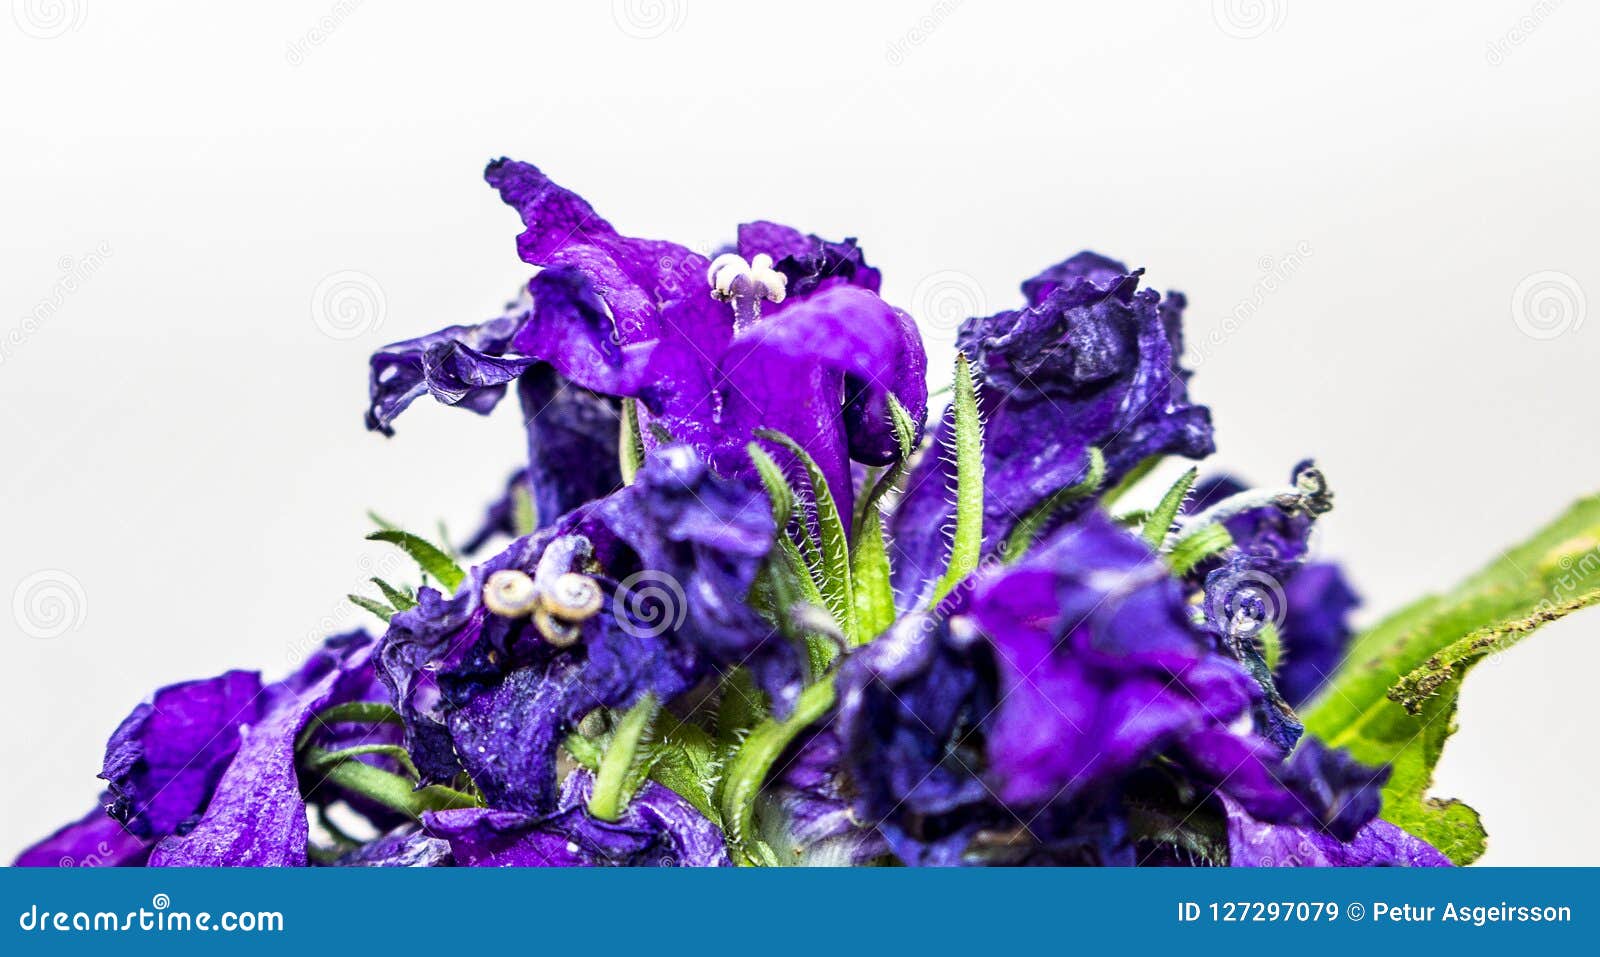 Blue Flower on White Isolated Background Stock Image - Image of blossom, natural: 127297079